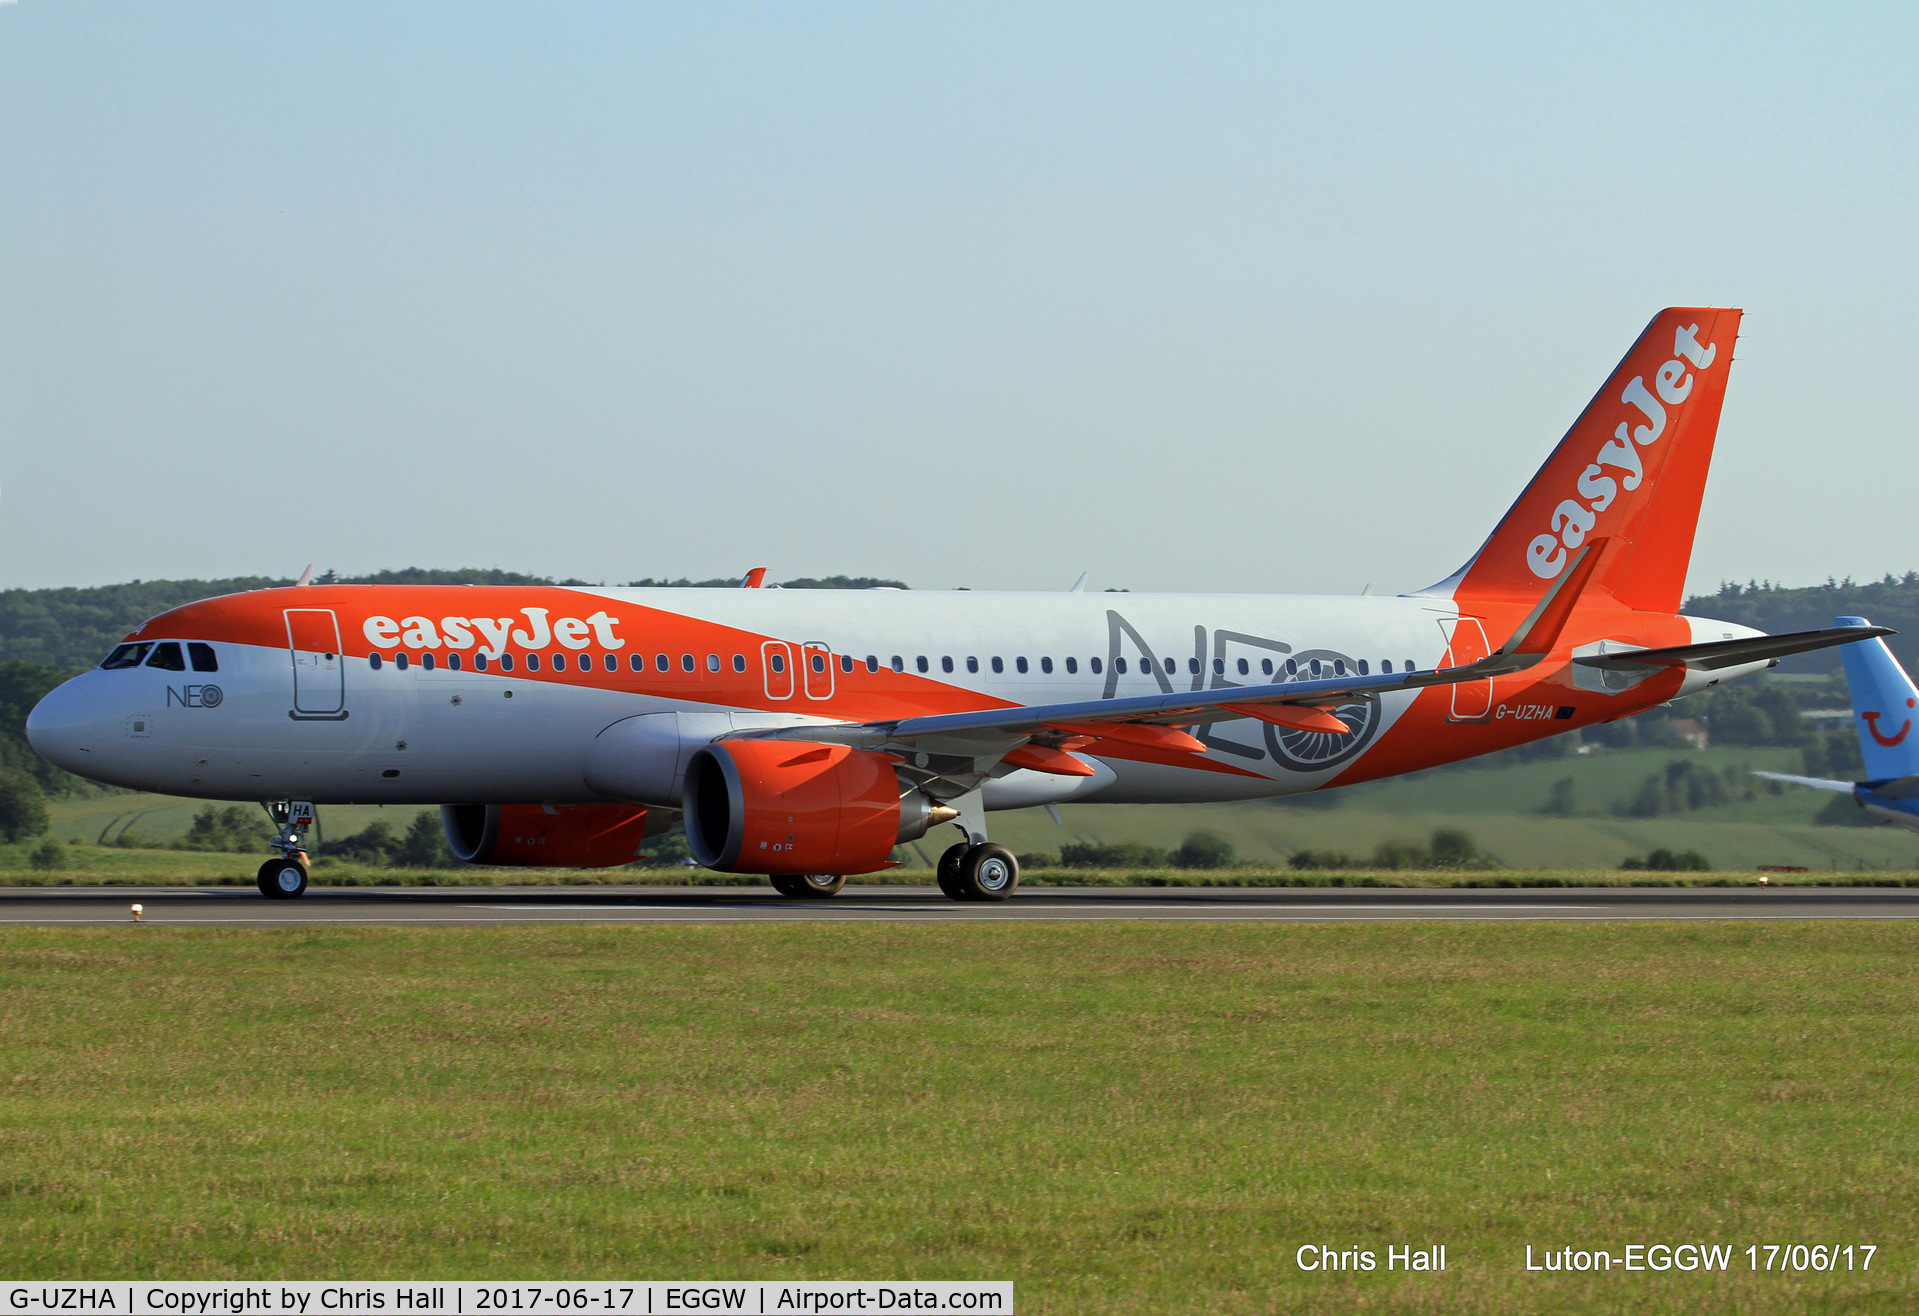 G-UZHA, 2017 Airbus A320-251NEO C/N 7649, easyJets 1st A320NEO on its 1st commercial flight